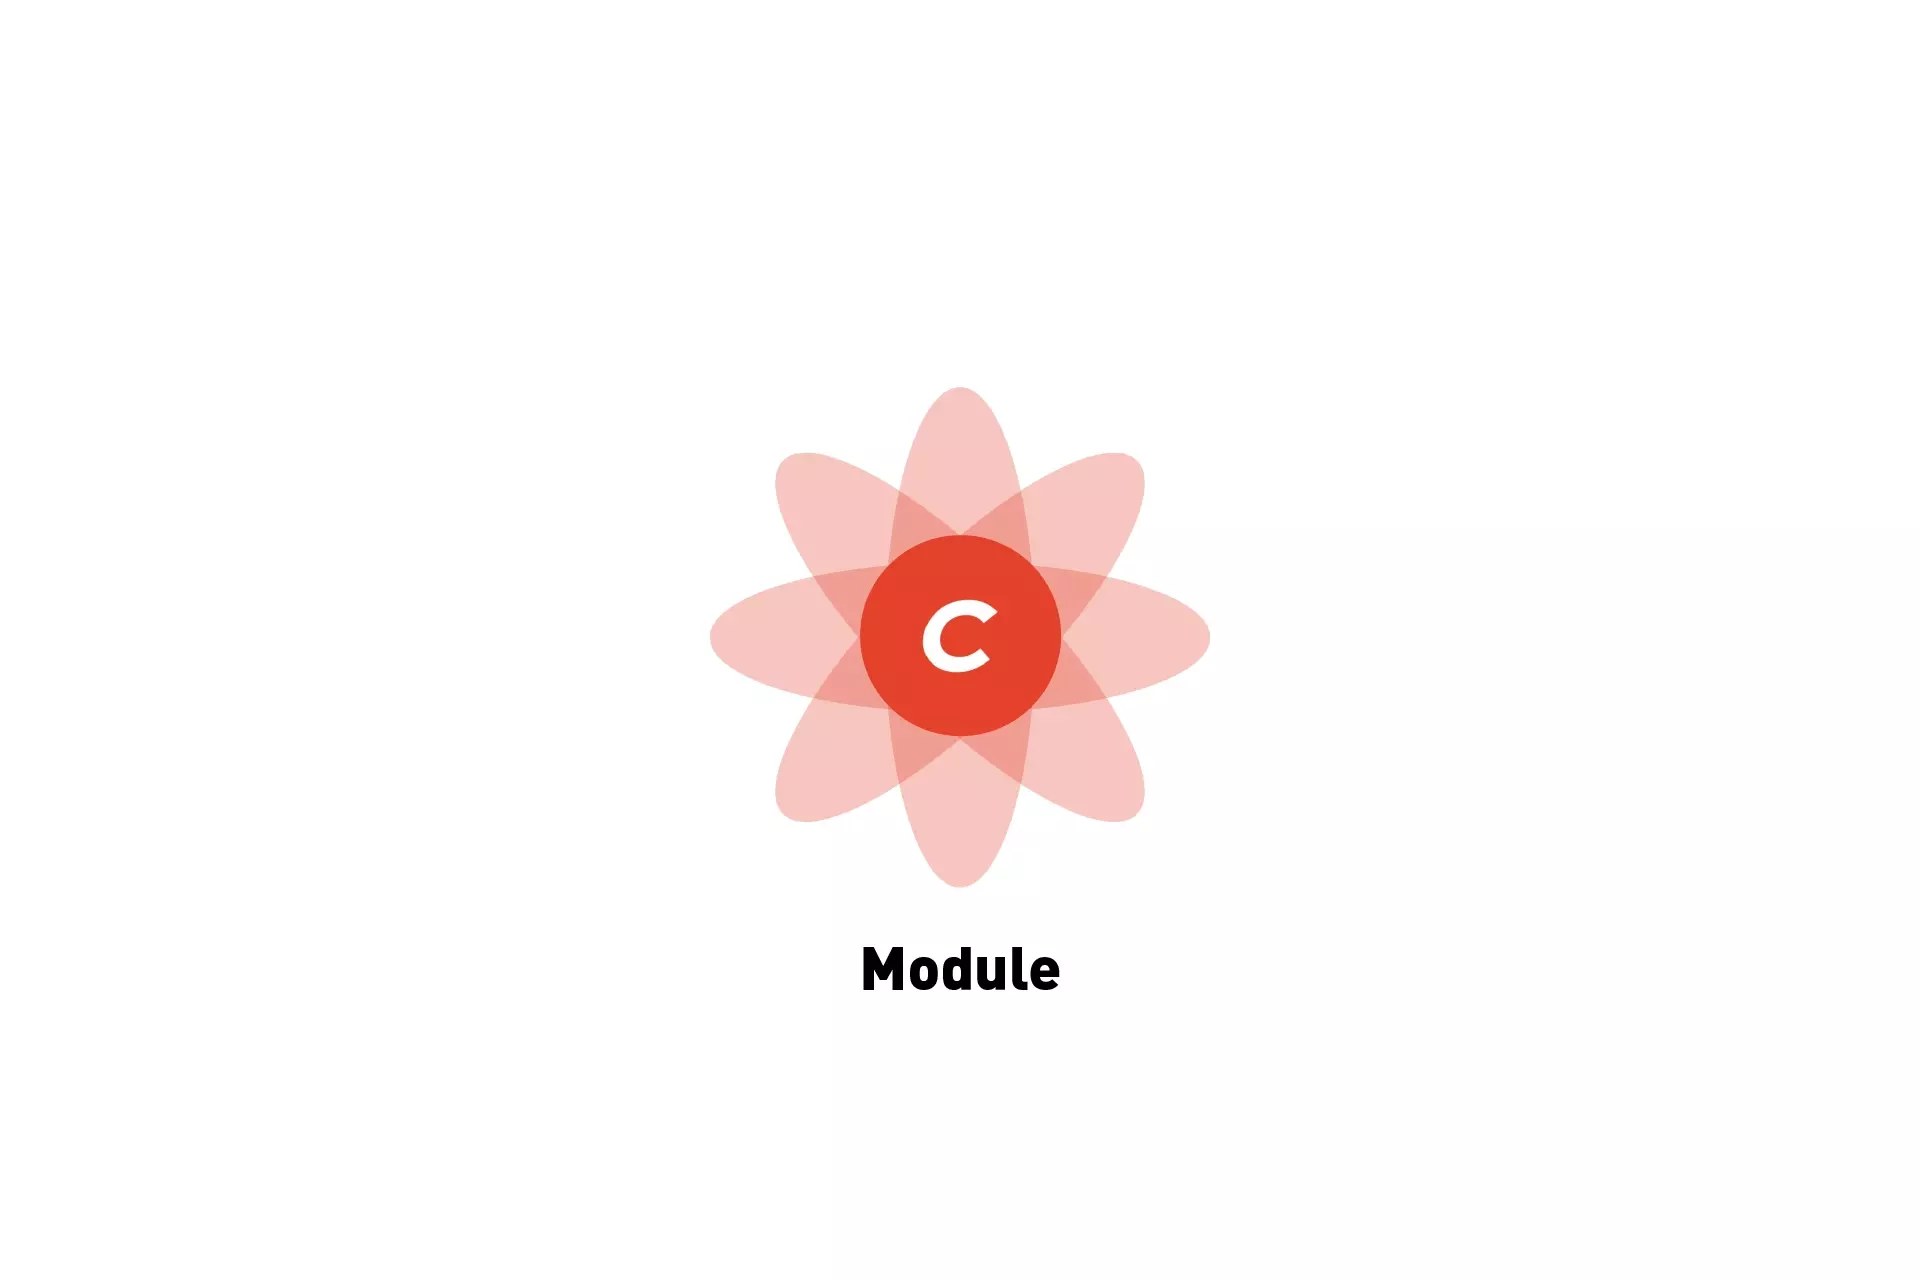 A flower that represents Craft CMS. Beneath it sits the text "Module".